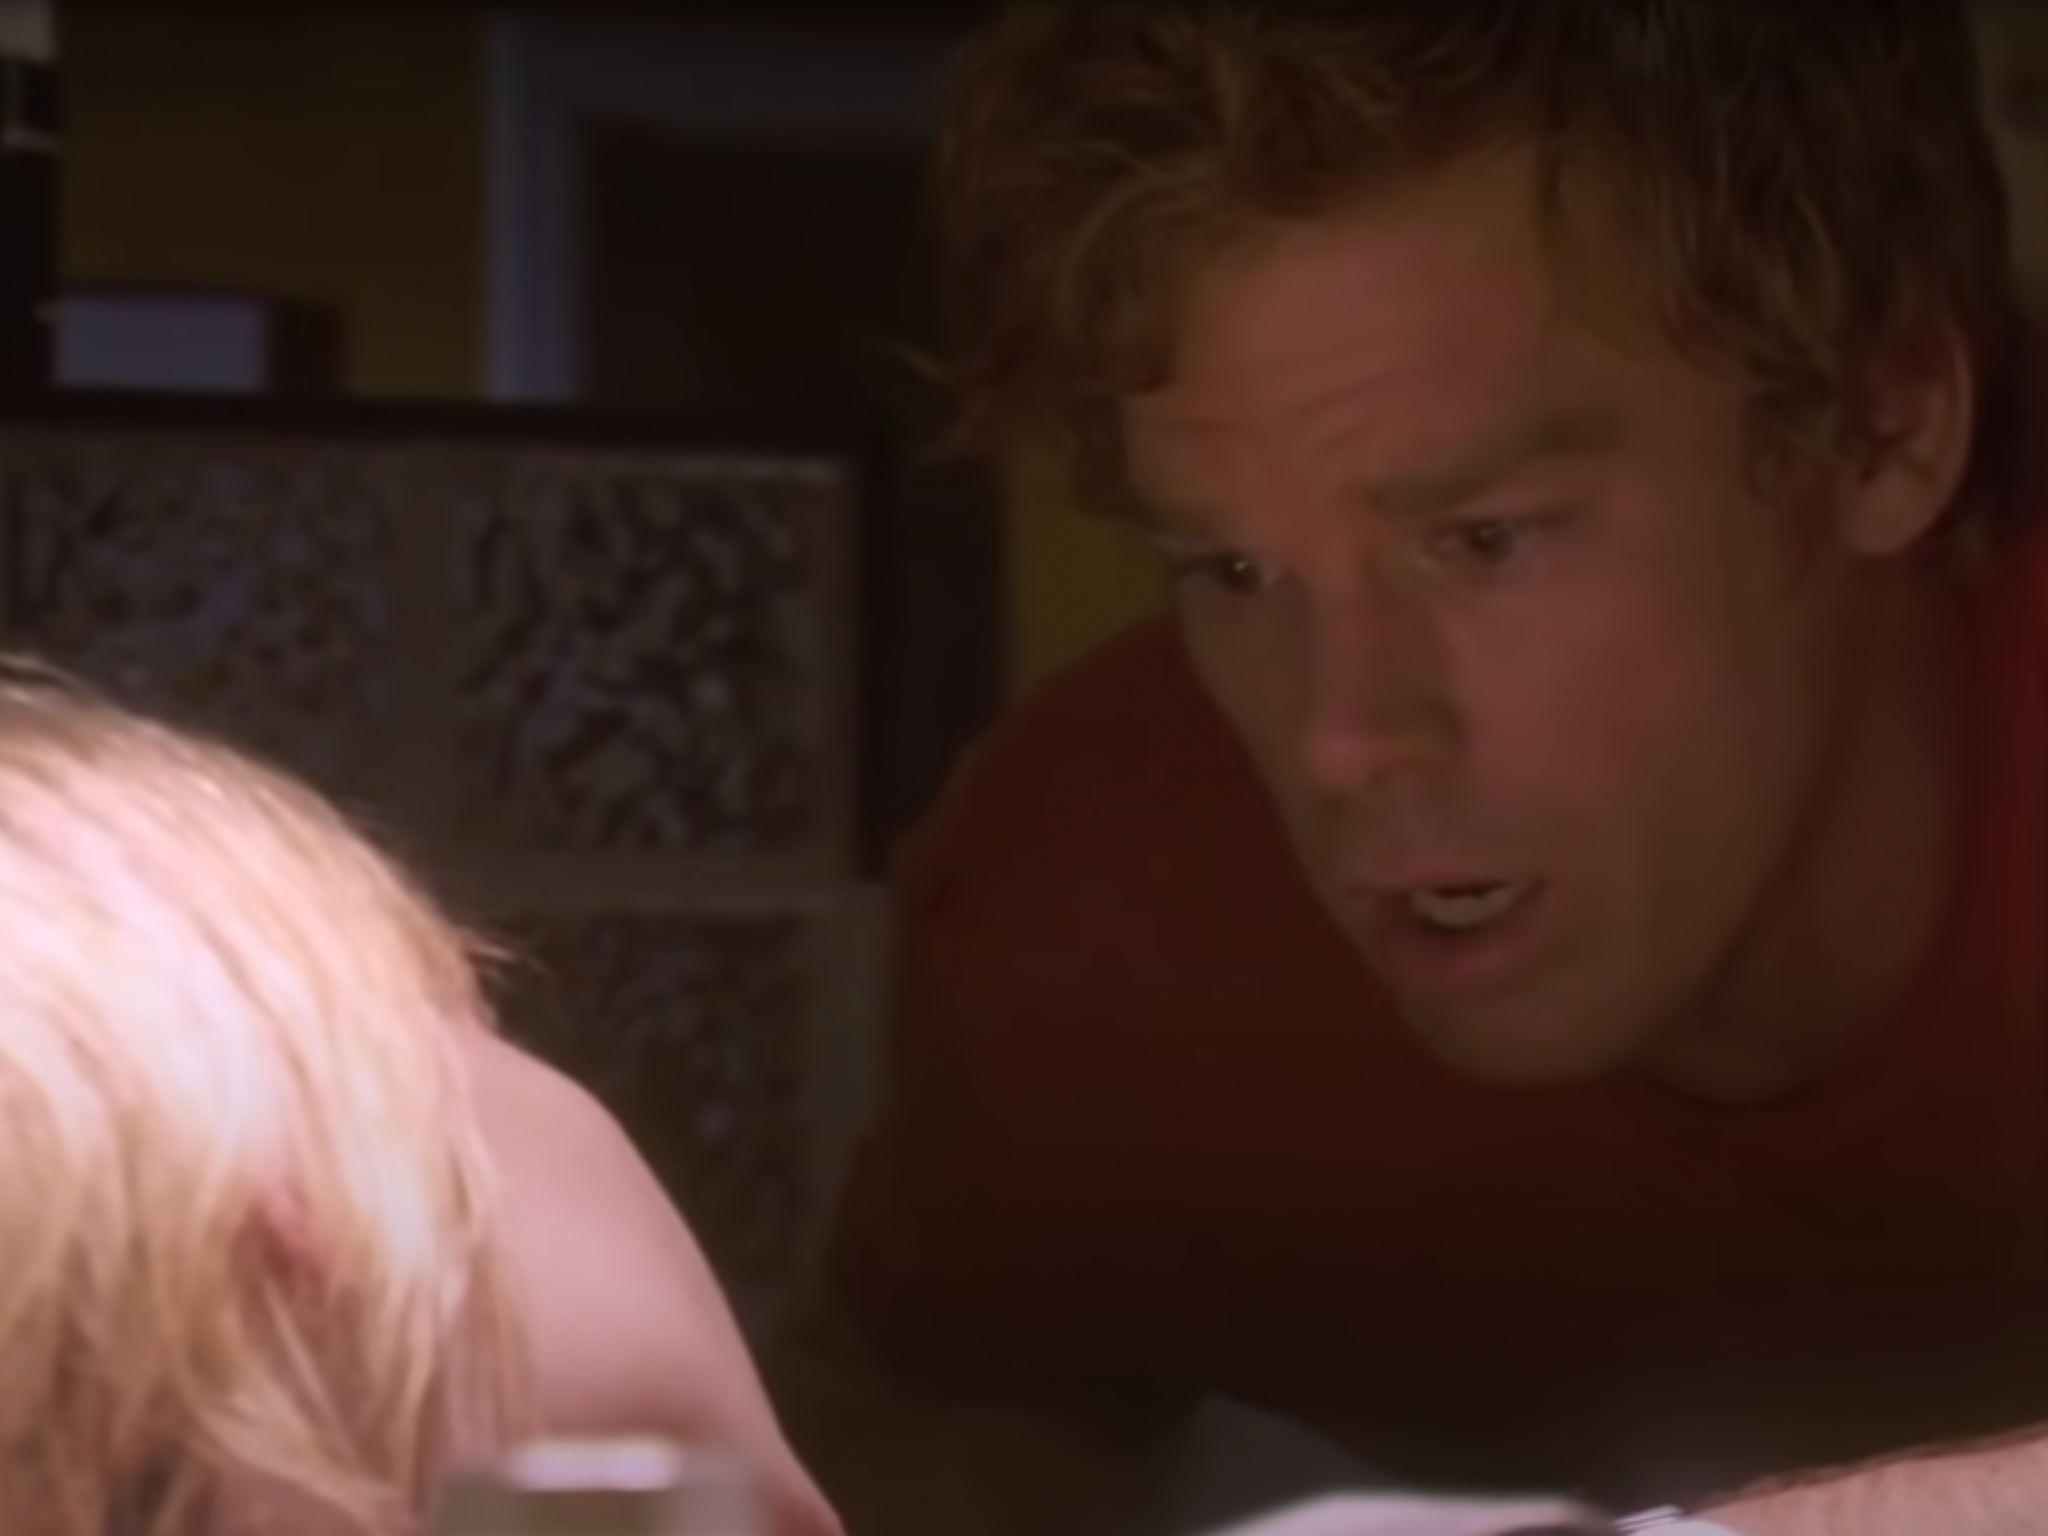 Dexter comes home to find his wife Rita dead in the bathtub